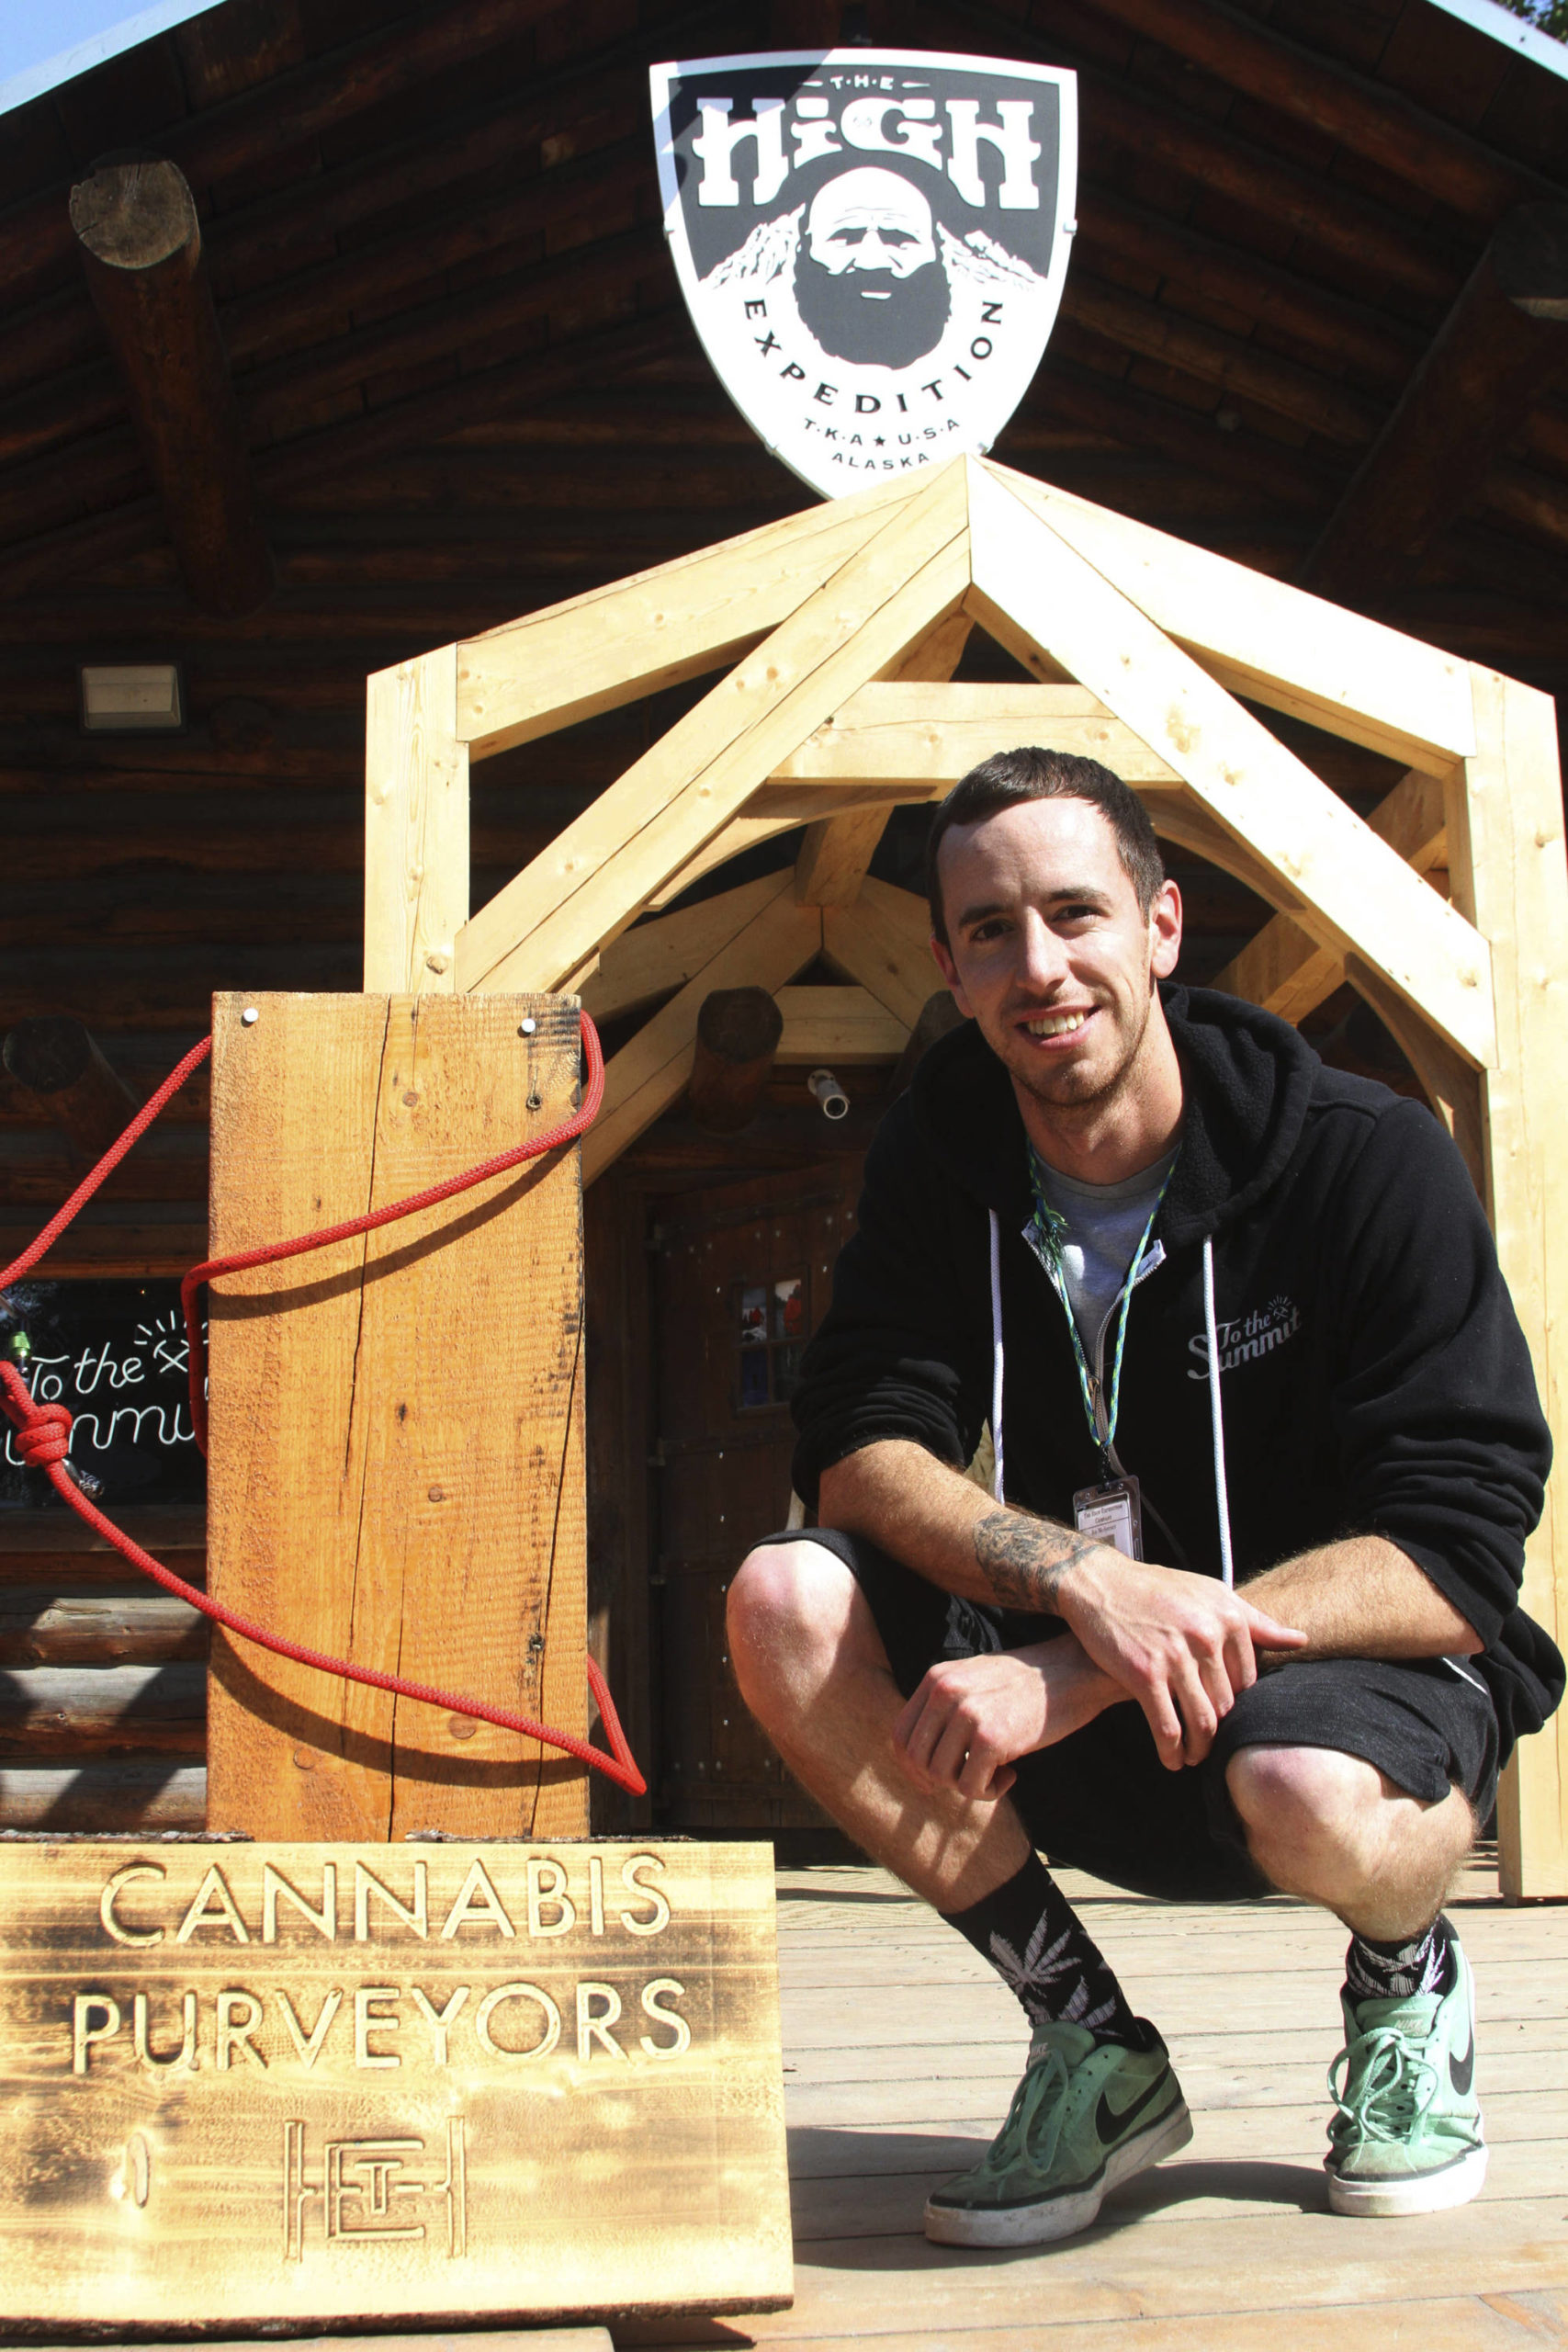 In this July 12, 2017, file photo, co-owner Joe McAneney poses for a photo in front of The High Expedition Co. in Talkeetna, Alaska. Regulators amid much fanfare in early 2020 approved the first cannabis lounges in Alaska. It was a milestone for the state’s legal marijuana industry. Then the pandemic hit. An owner of one of the shops hopes to open later this year. An owner of the other said his shop opened briefly last fall before having to hit pause amid a surge in COVID-19 cases across the state. (AP Photo / Mark Thiessen)